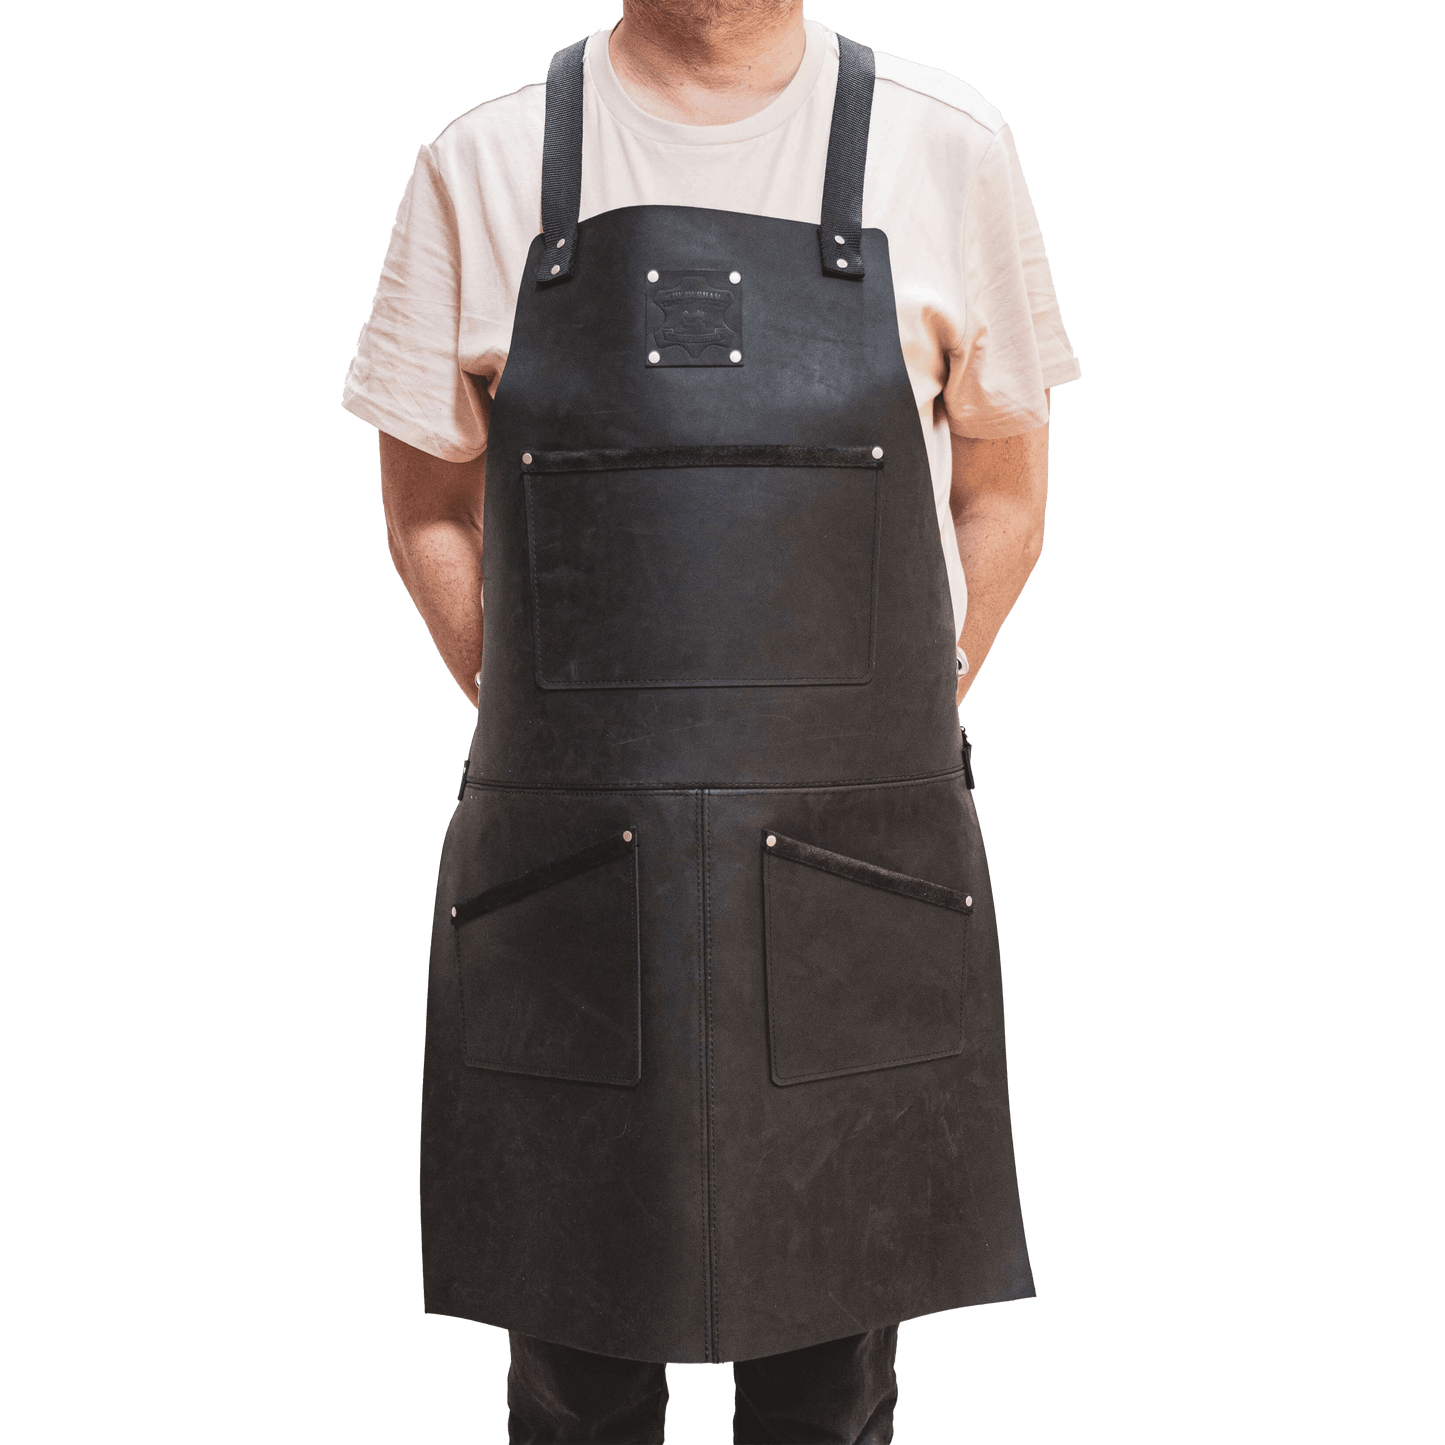 A carpenter wearing a dark leather apron from The Durham Leatherworker over a casual white t-shirt, standing with his arms subtly to his sides, against a black background.